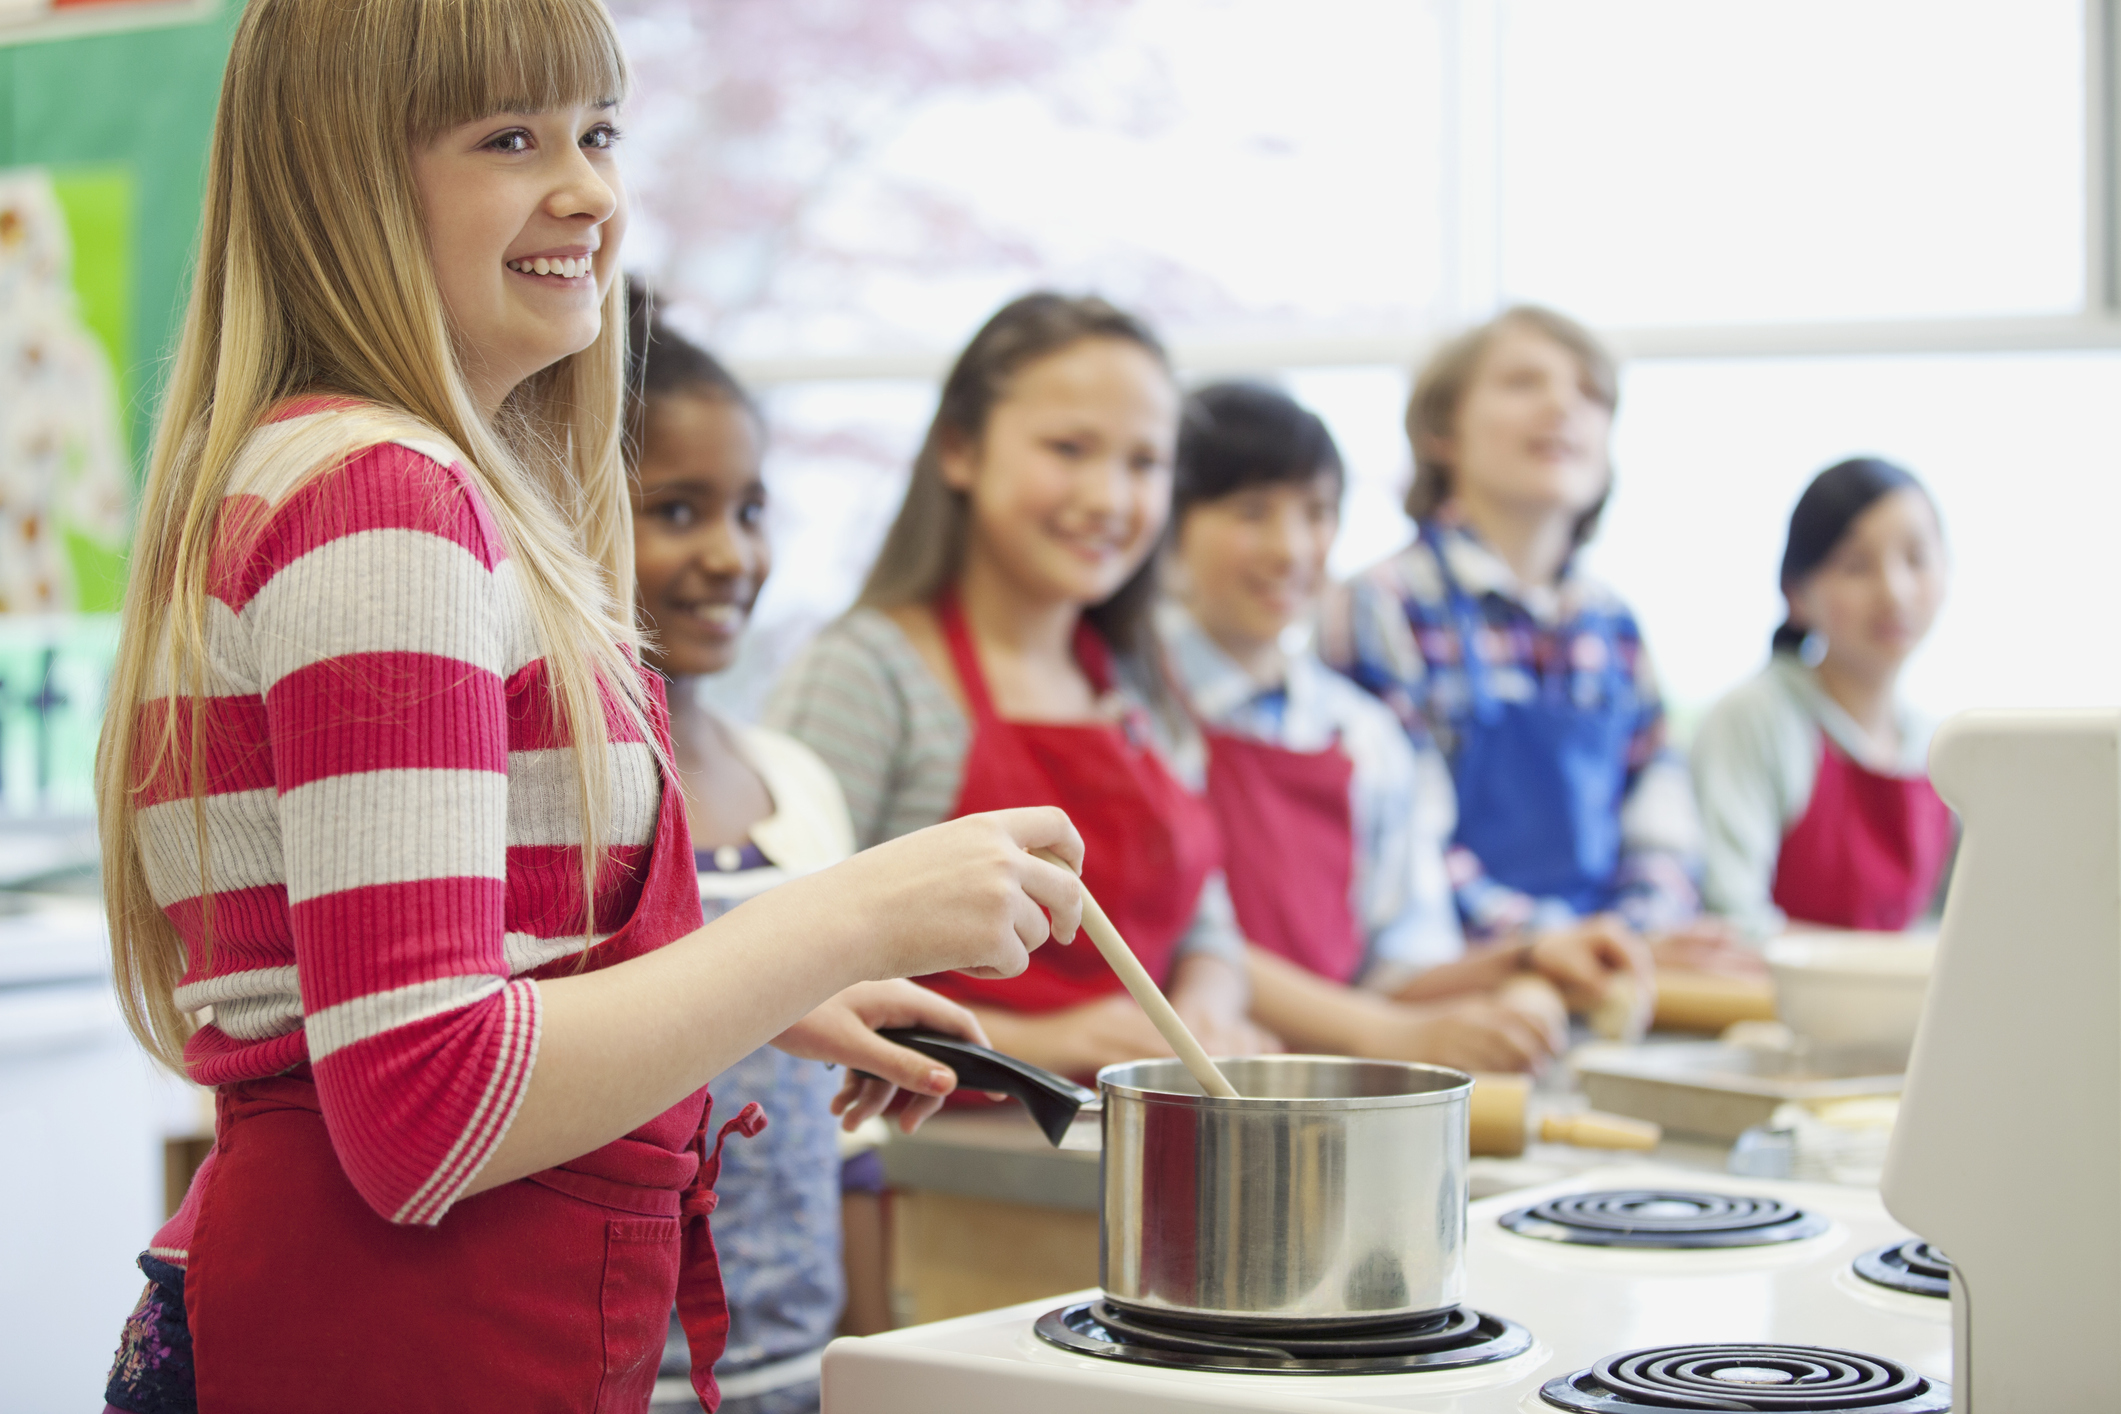 Maltby centre - autism services - flying solo: cookin’ with care - gettyimages 1430673660